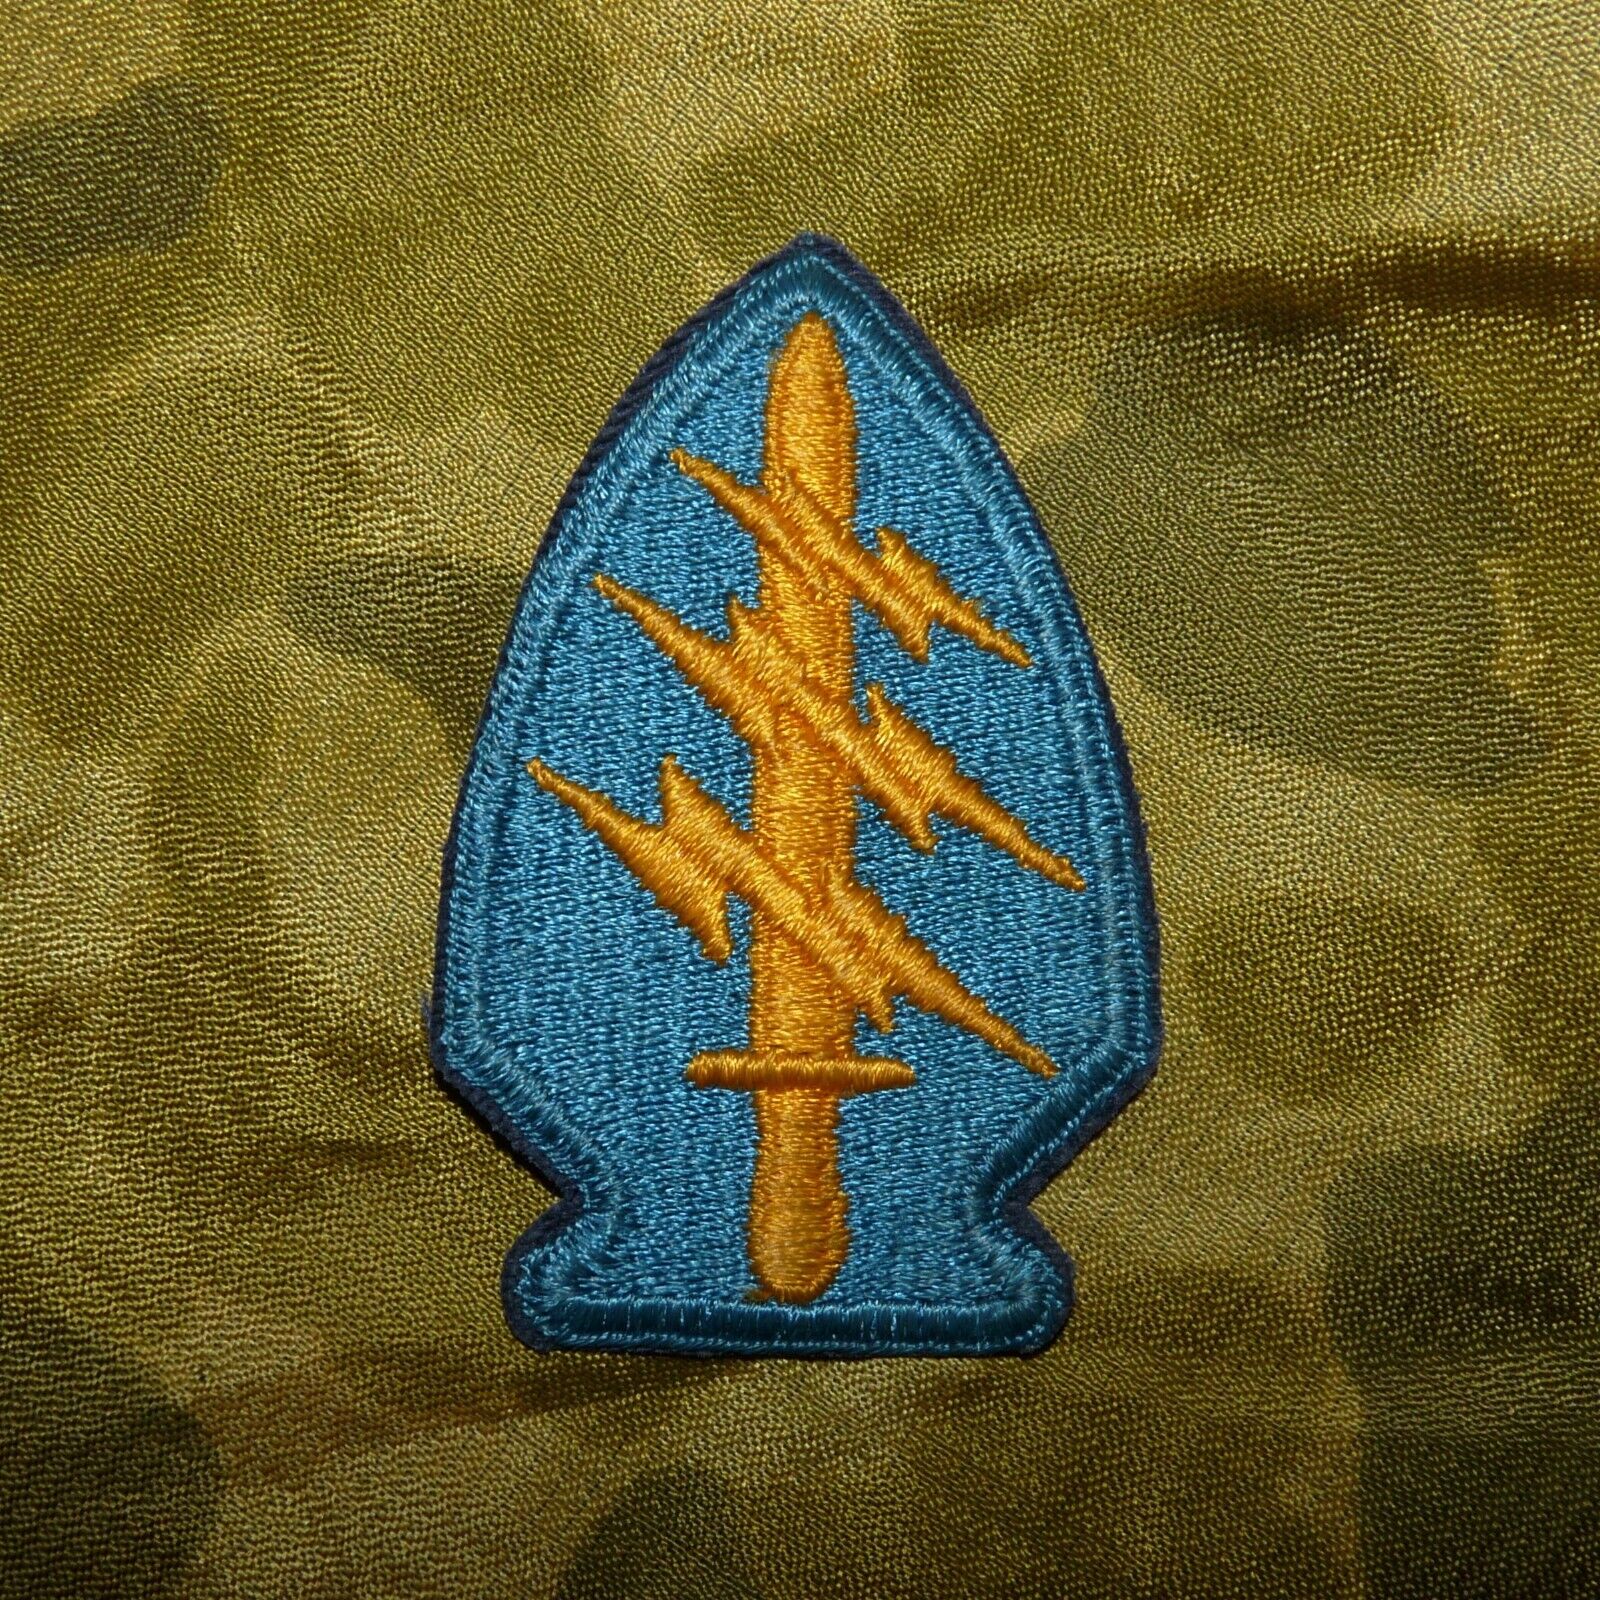 Original late 1960s US Army Special Forces Cut Edge SSI Sleeve Patch